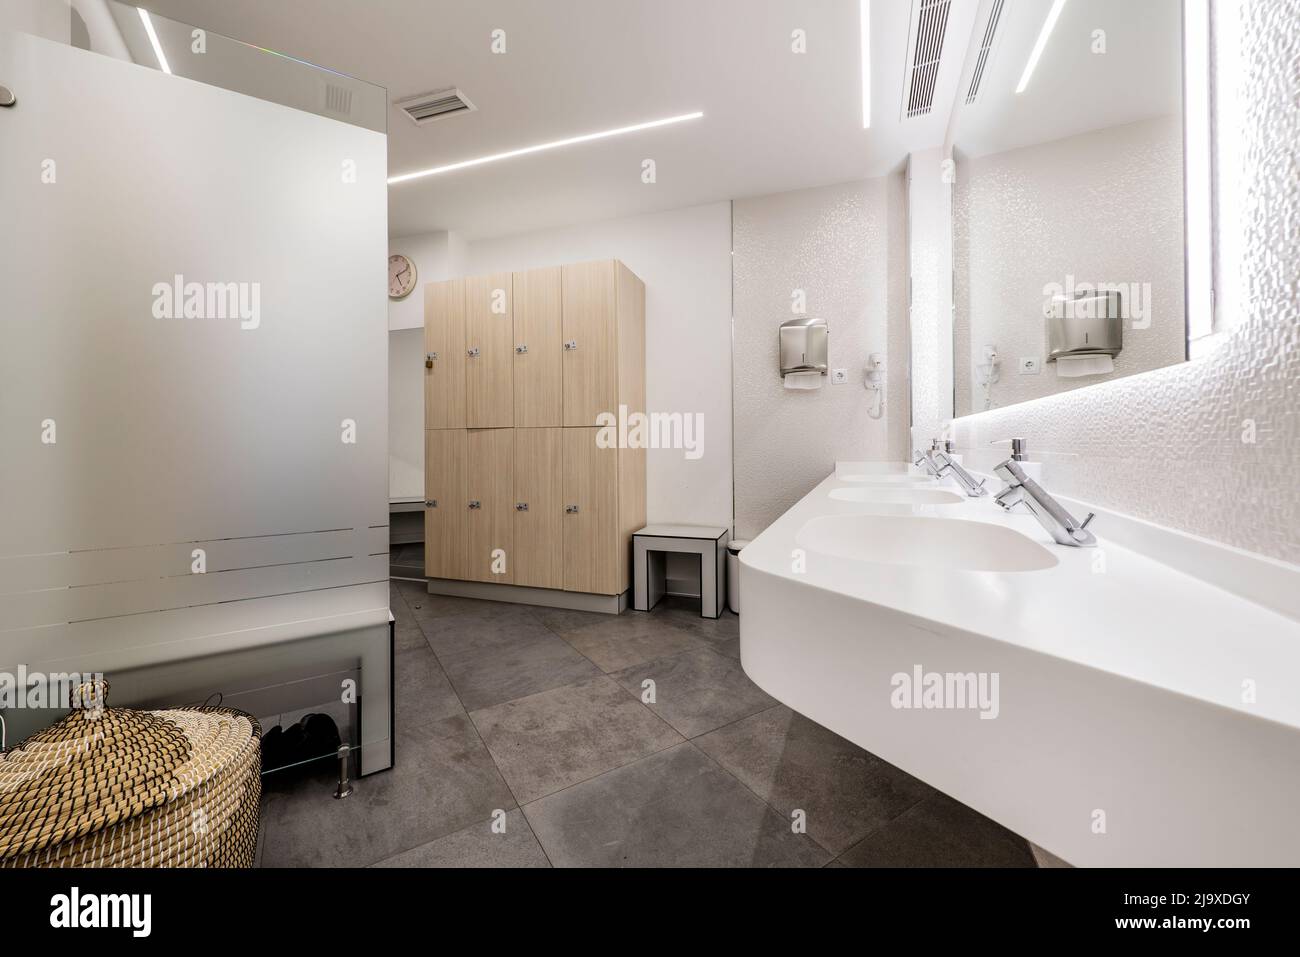 Toilet of a locker room of a gym with lockers and resin sink Stock Photo